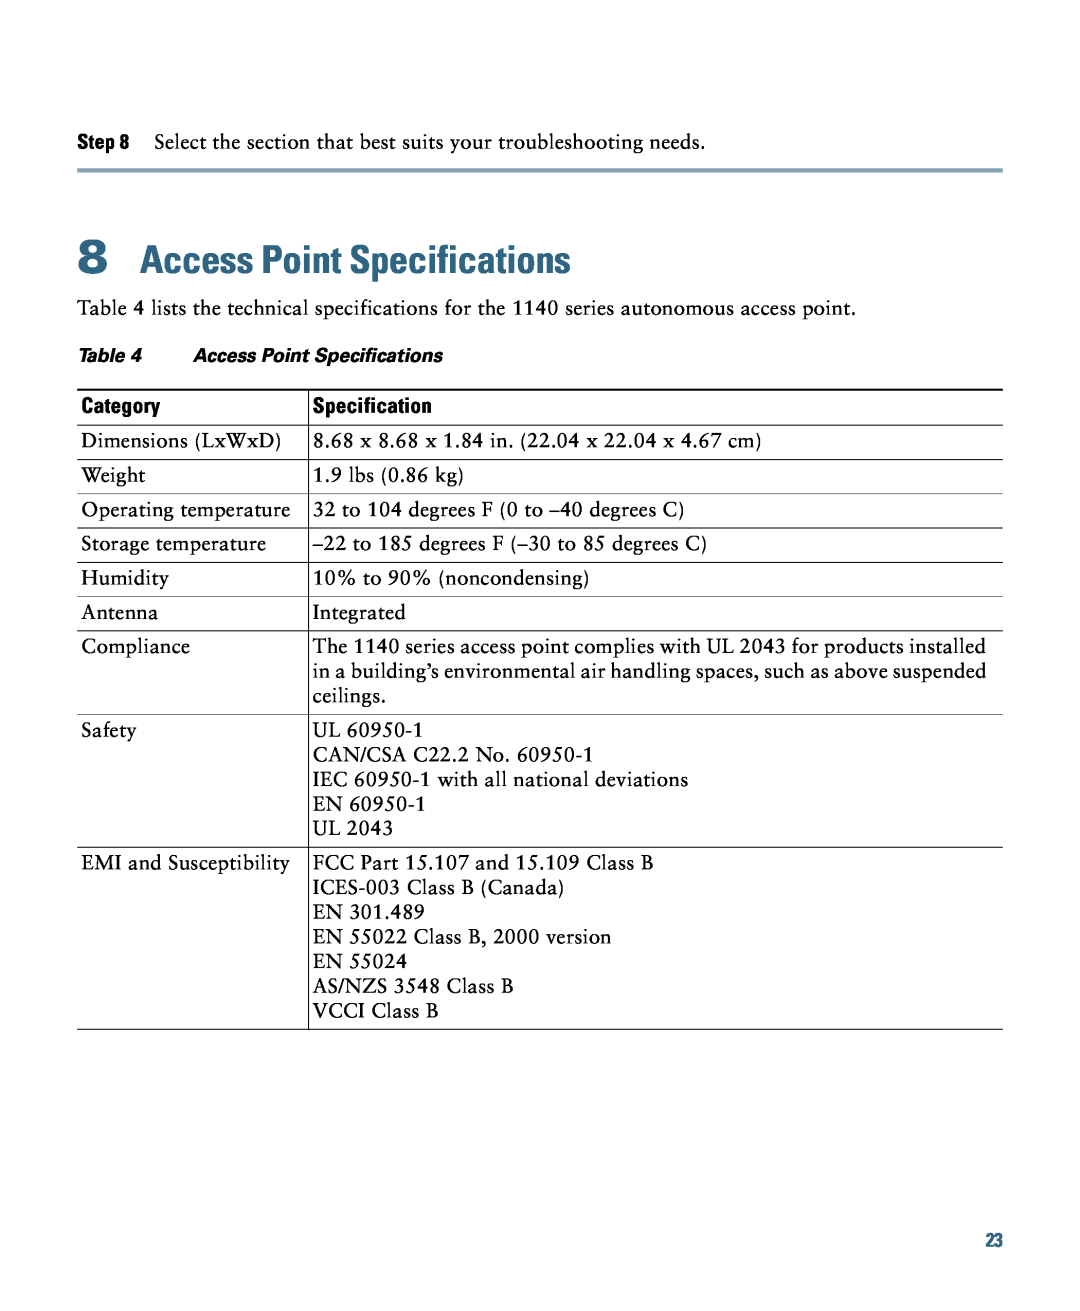 Cisco Systems 1140 specifications Access Point Specifications, Category 